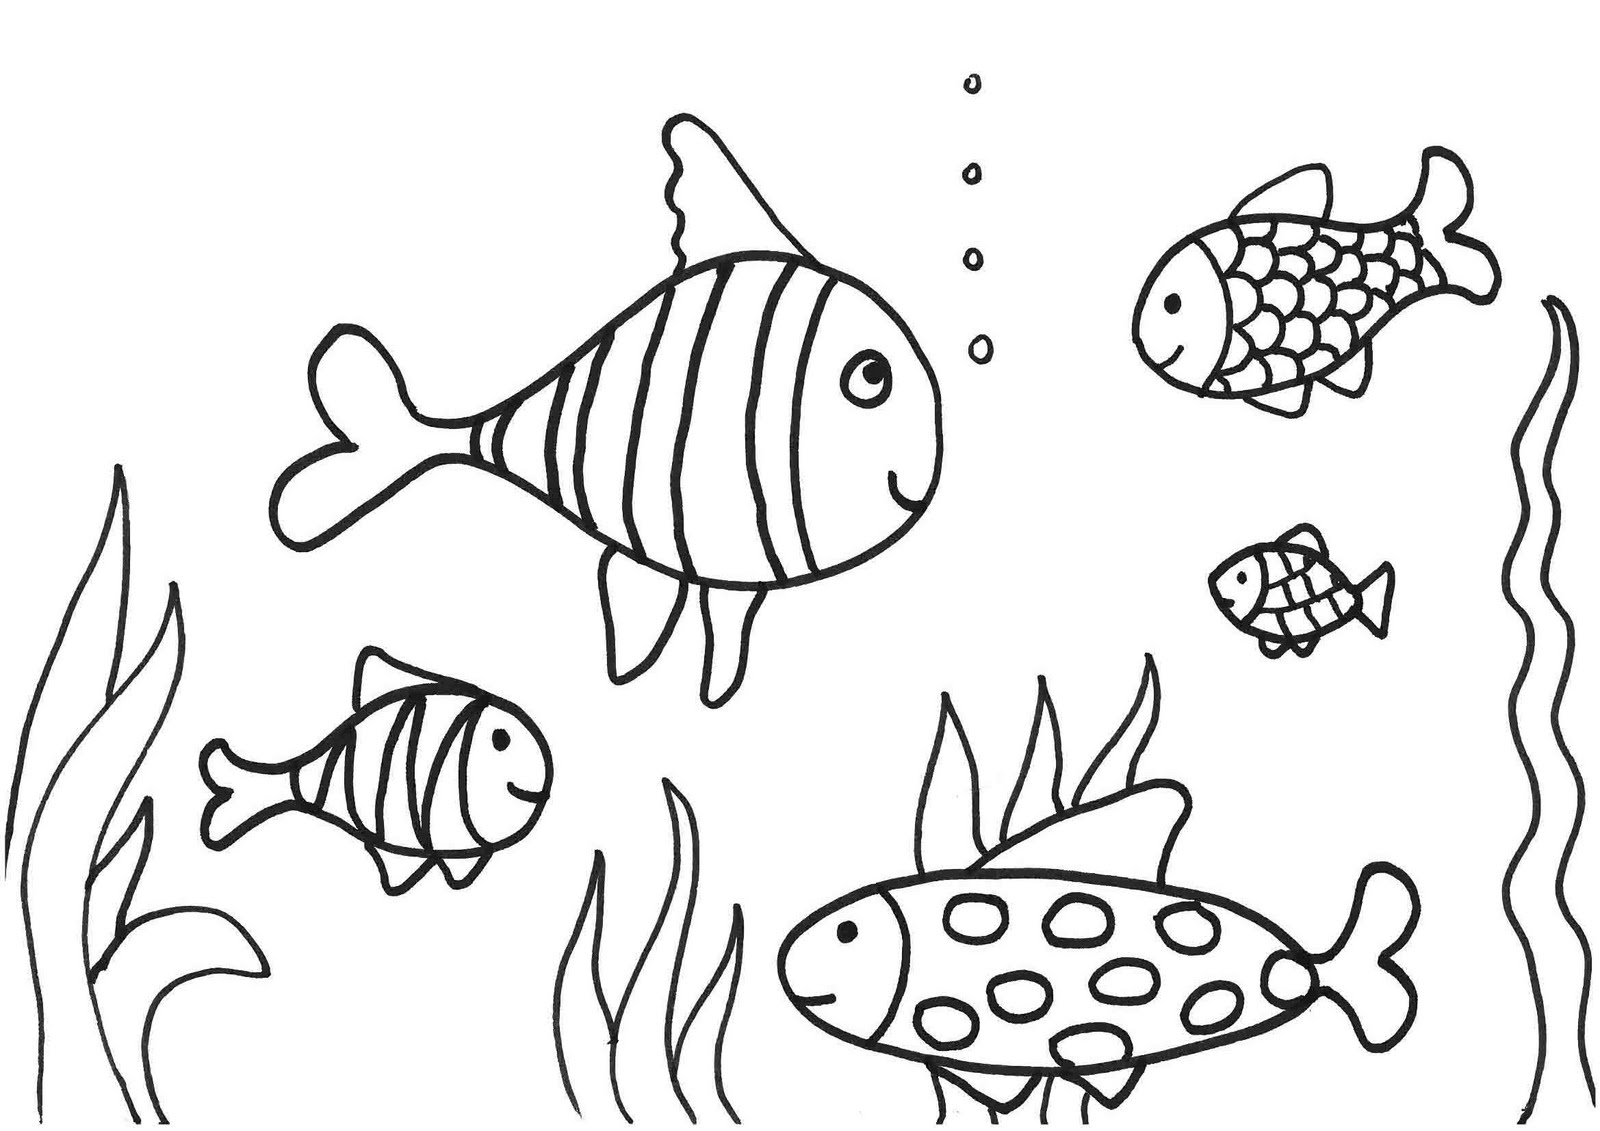 Is it a toy: Free colouring pages, for a change